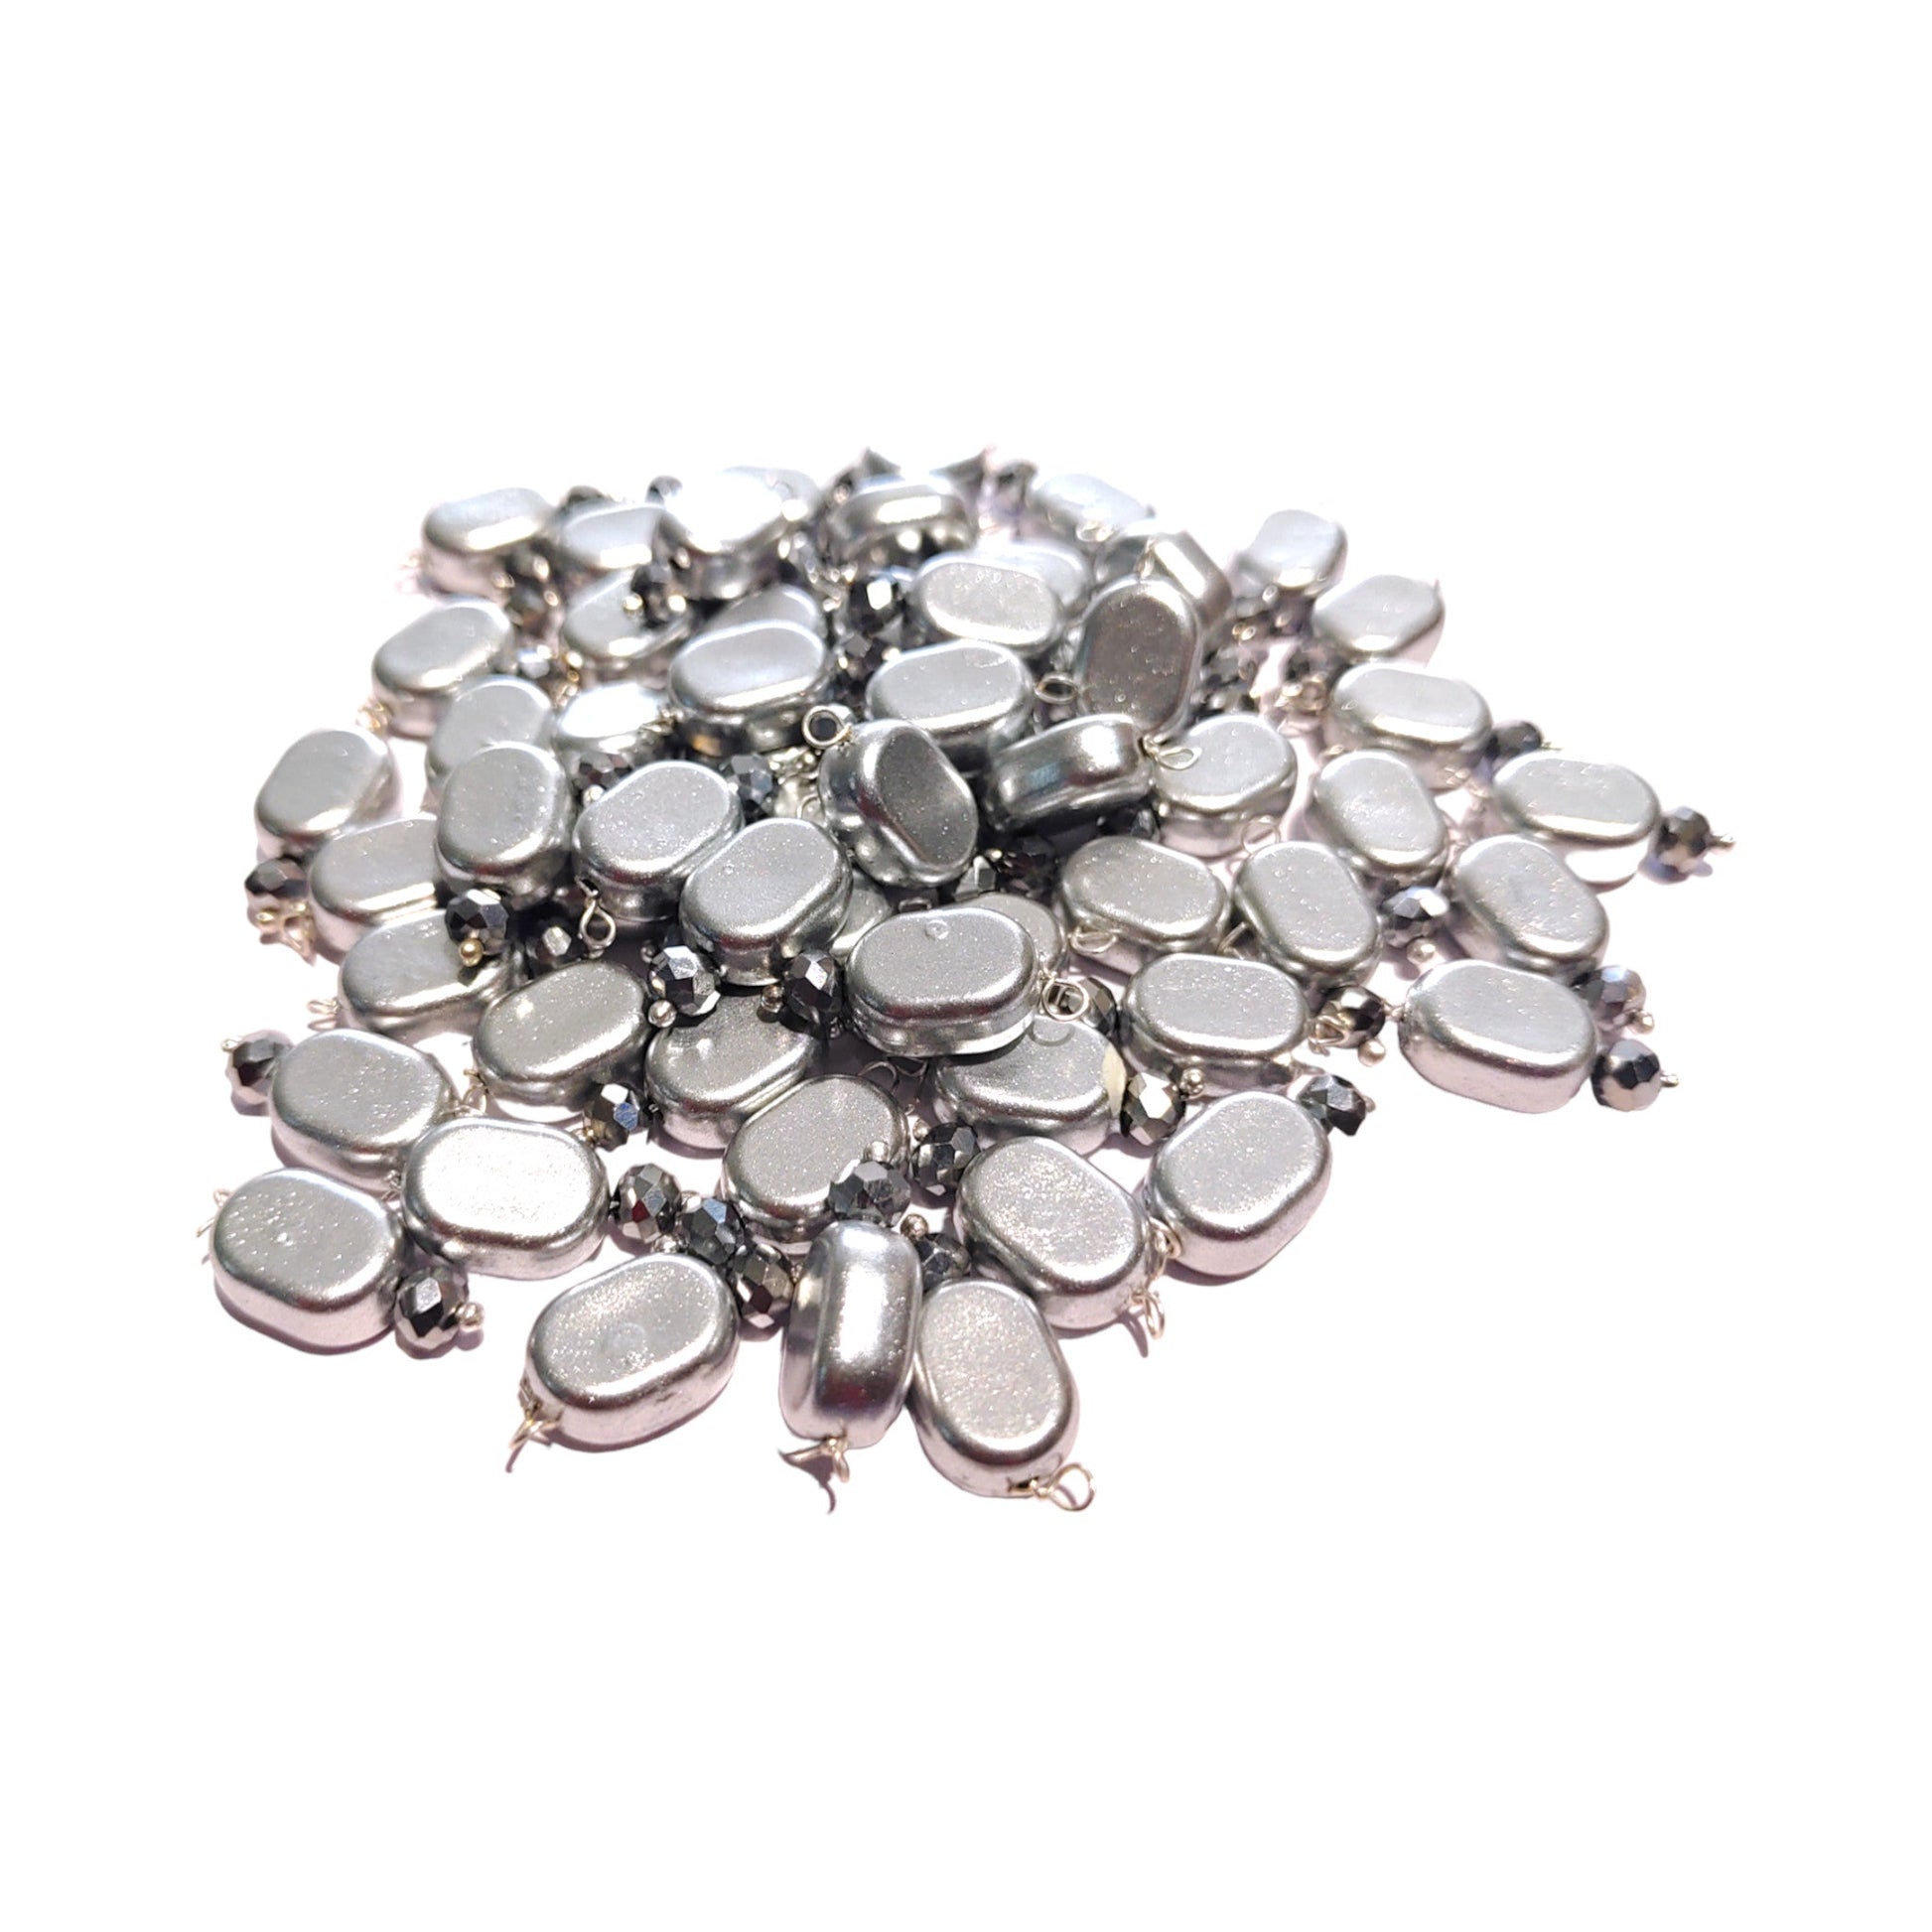 Indian Petals 100Pcs Colored Plastic Bead with Crystal Ball Drop for Craft Décor or Jewelry Making, 8x12mm, Silver